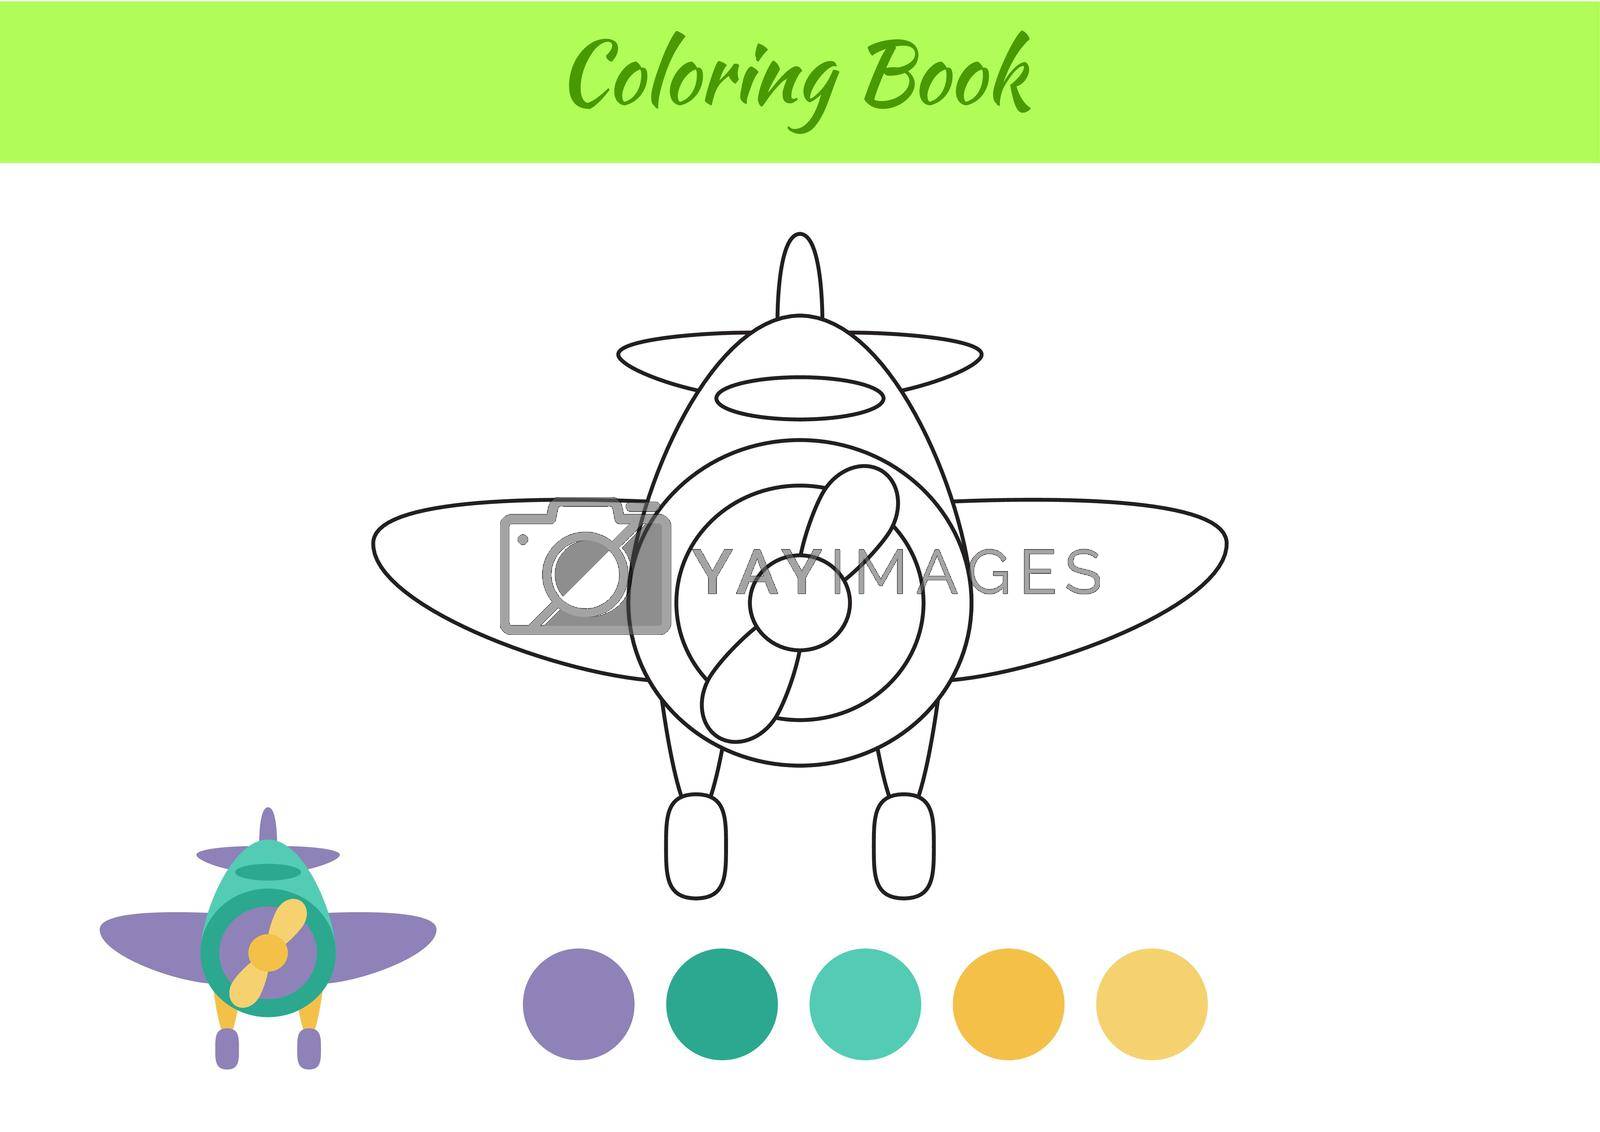 Coloring book airplane for children. Educational activity page for preschool years kids and toddlers with transport. Printable worksheet. Cartoon colorful vector illustration.